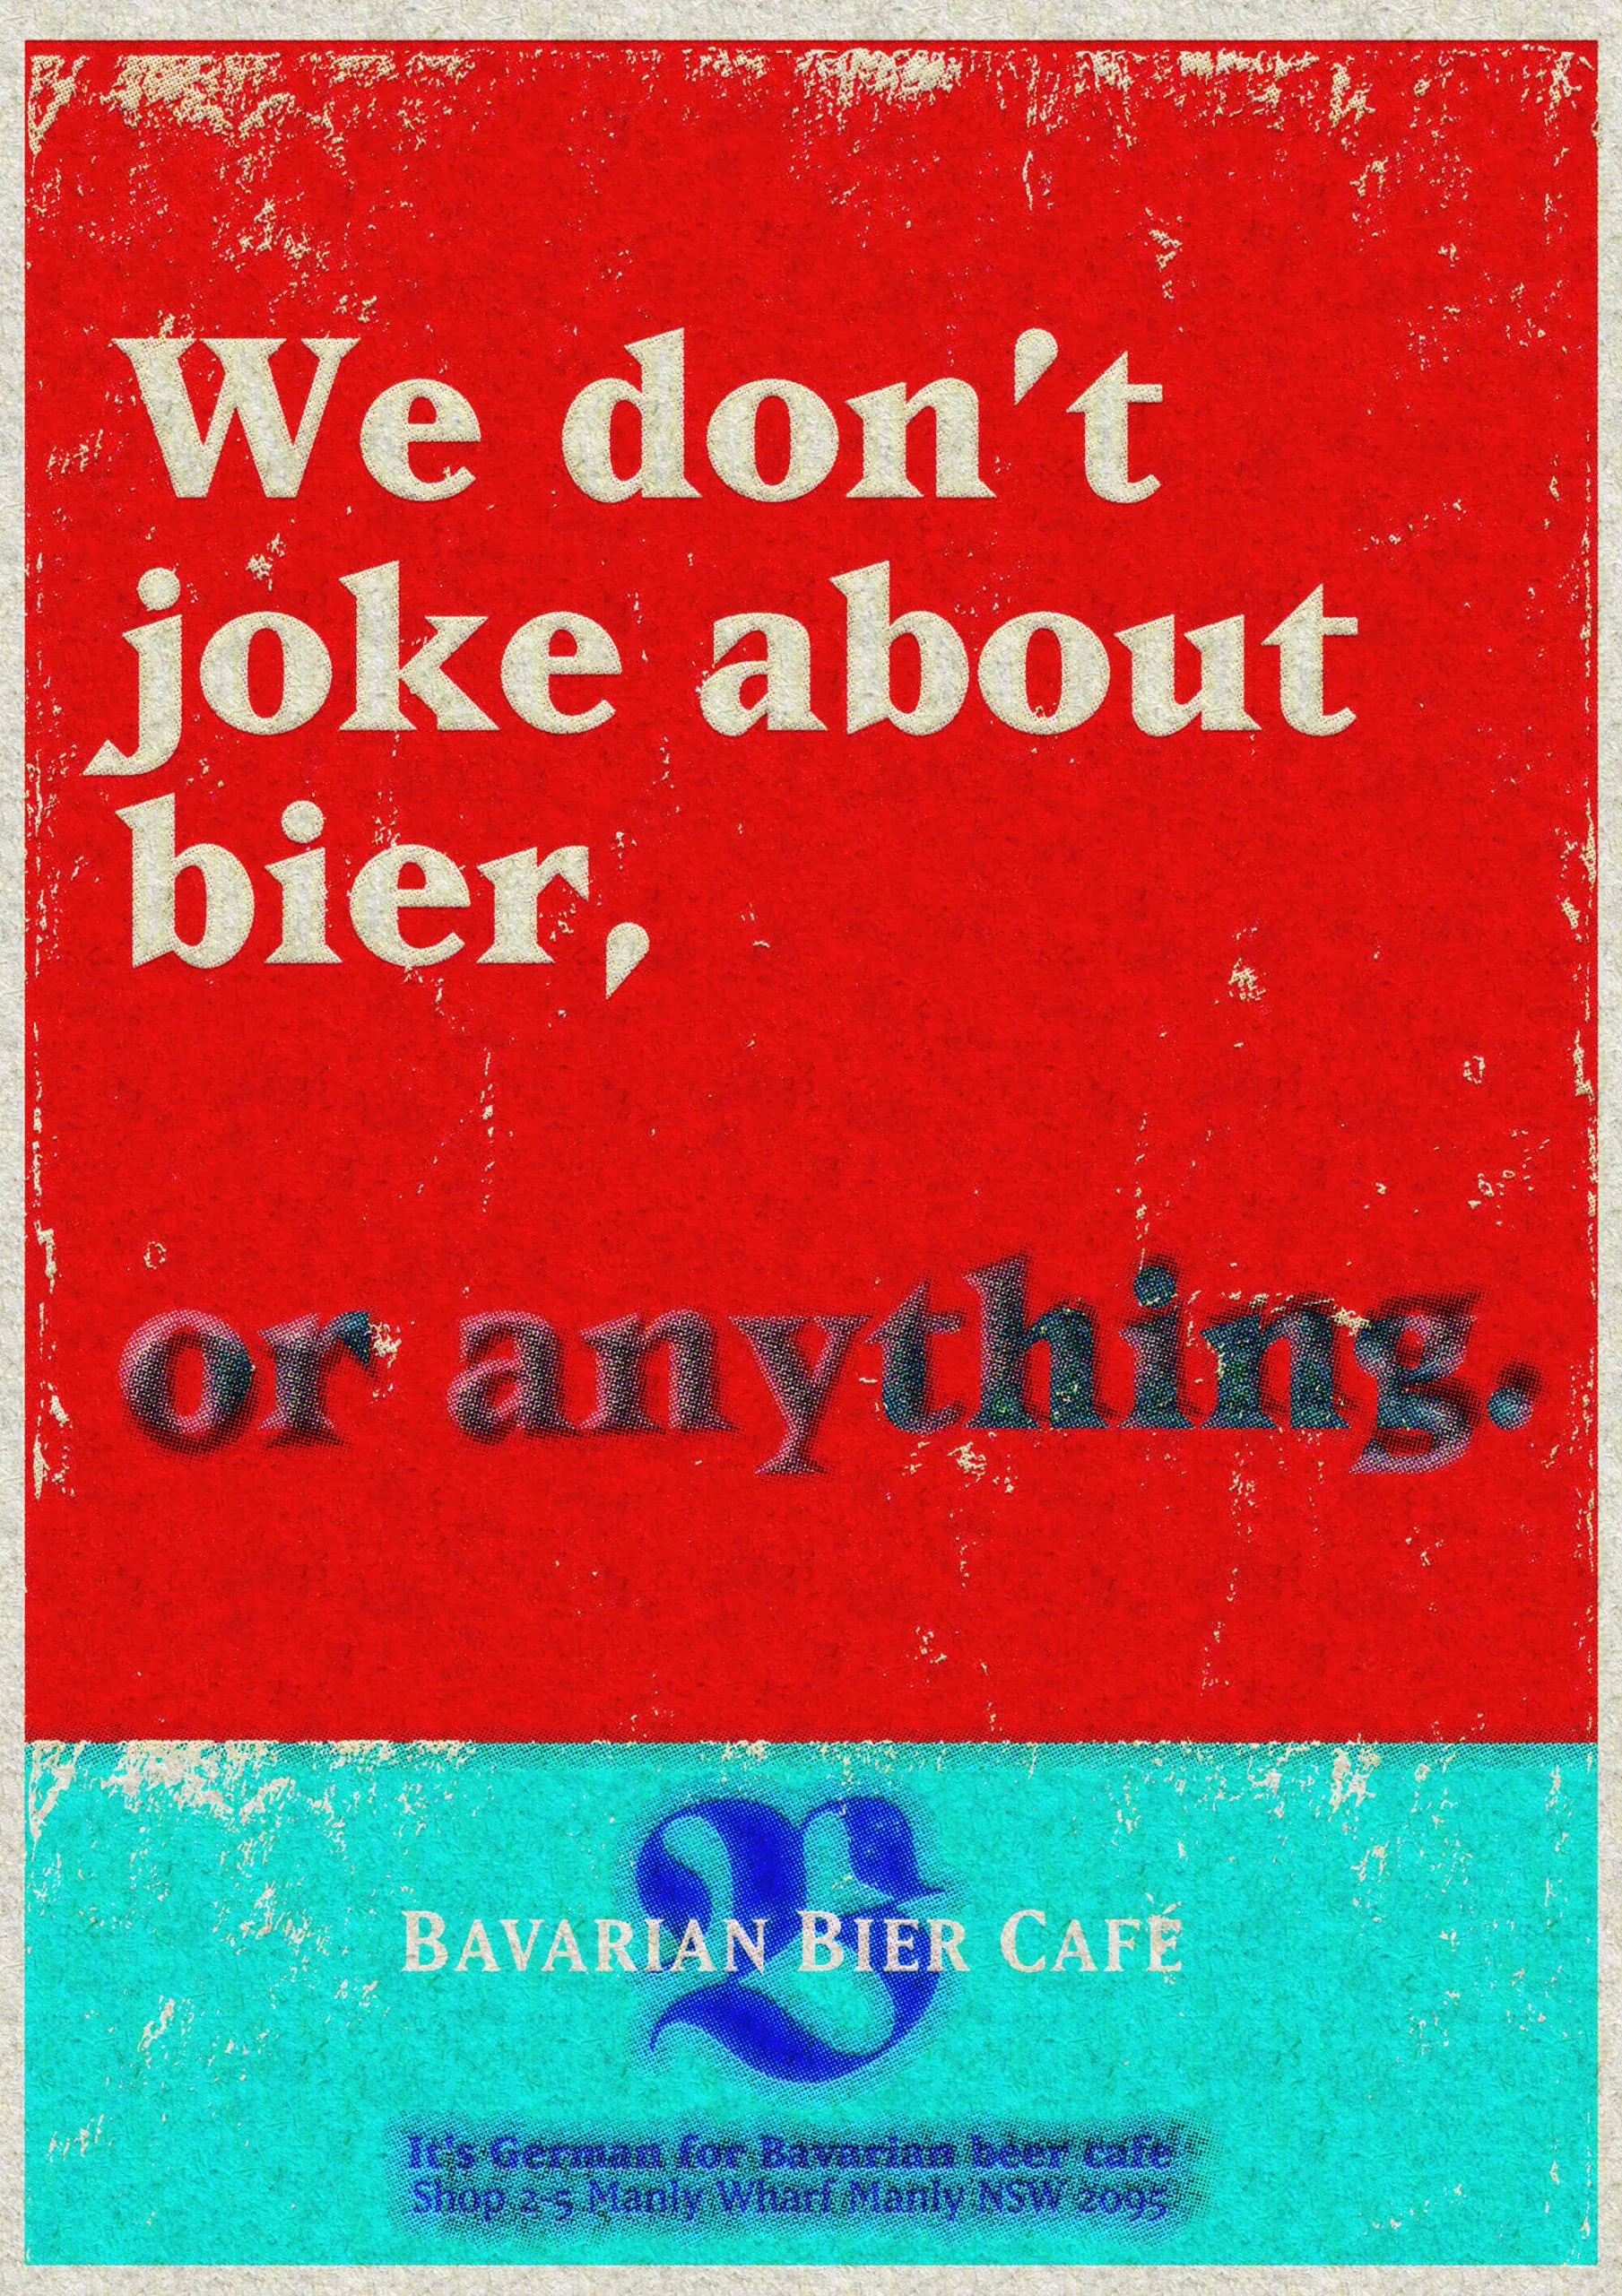 An advert for a Bavarian Bier Café that says "We don't joke about beir, or anything"